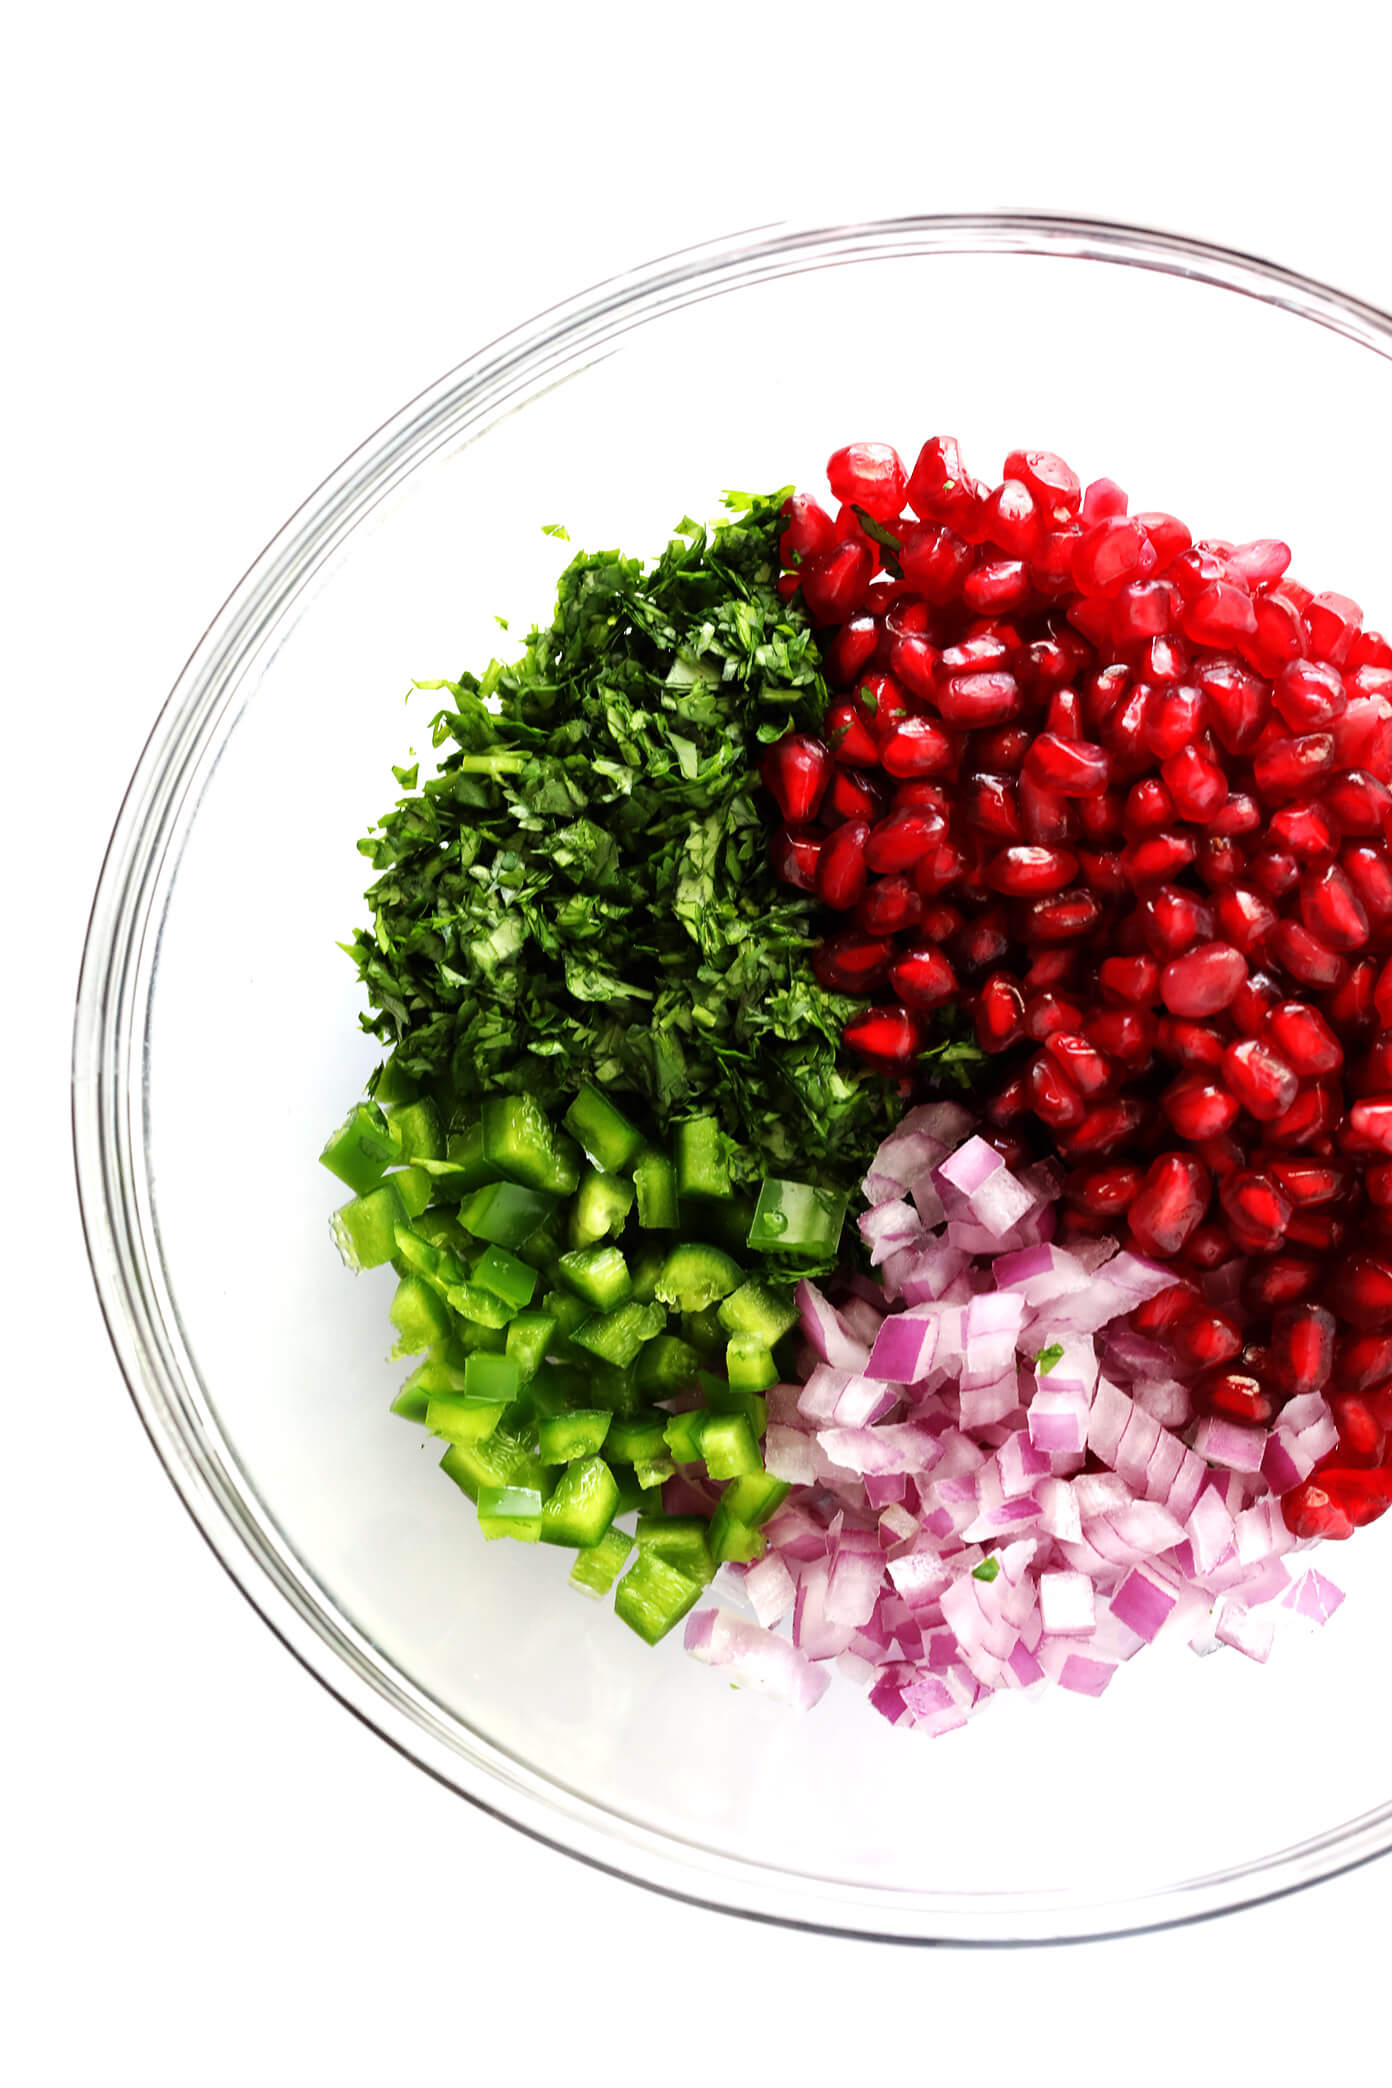 This 5-Ingredient Pomegranate Salsa is so juicy and sweet, and it only takes a few minutes to make! Just grab some POM-POMs, red onion, cilantro, jalapeño and a lime, and you're ready to go!